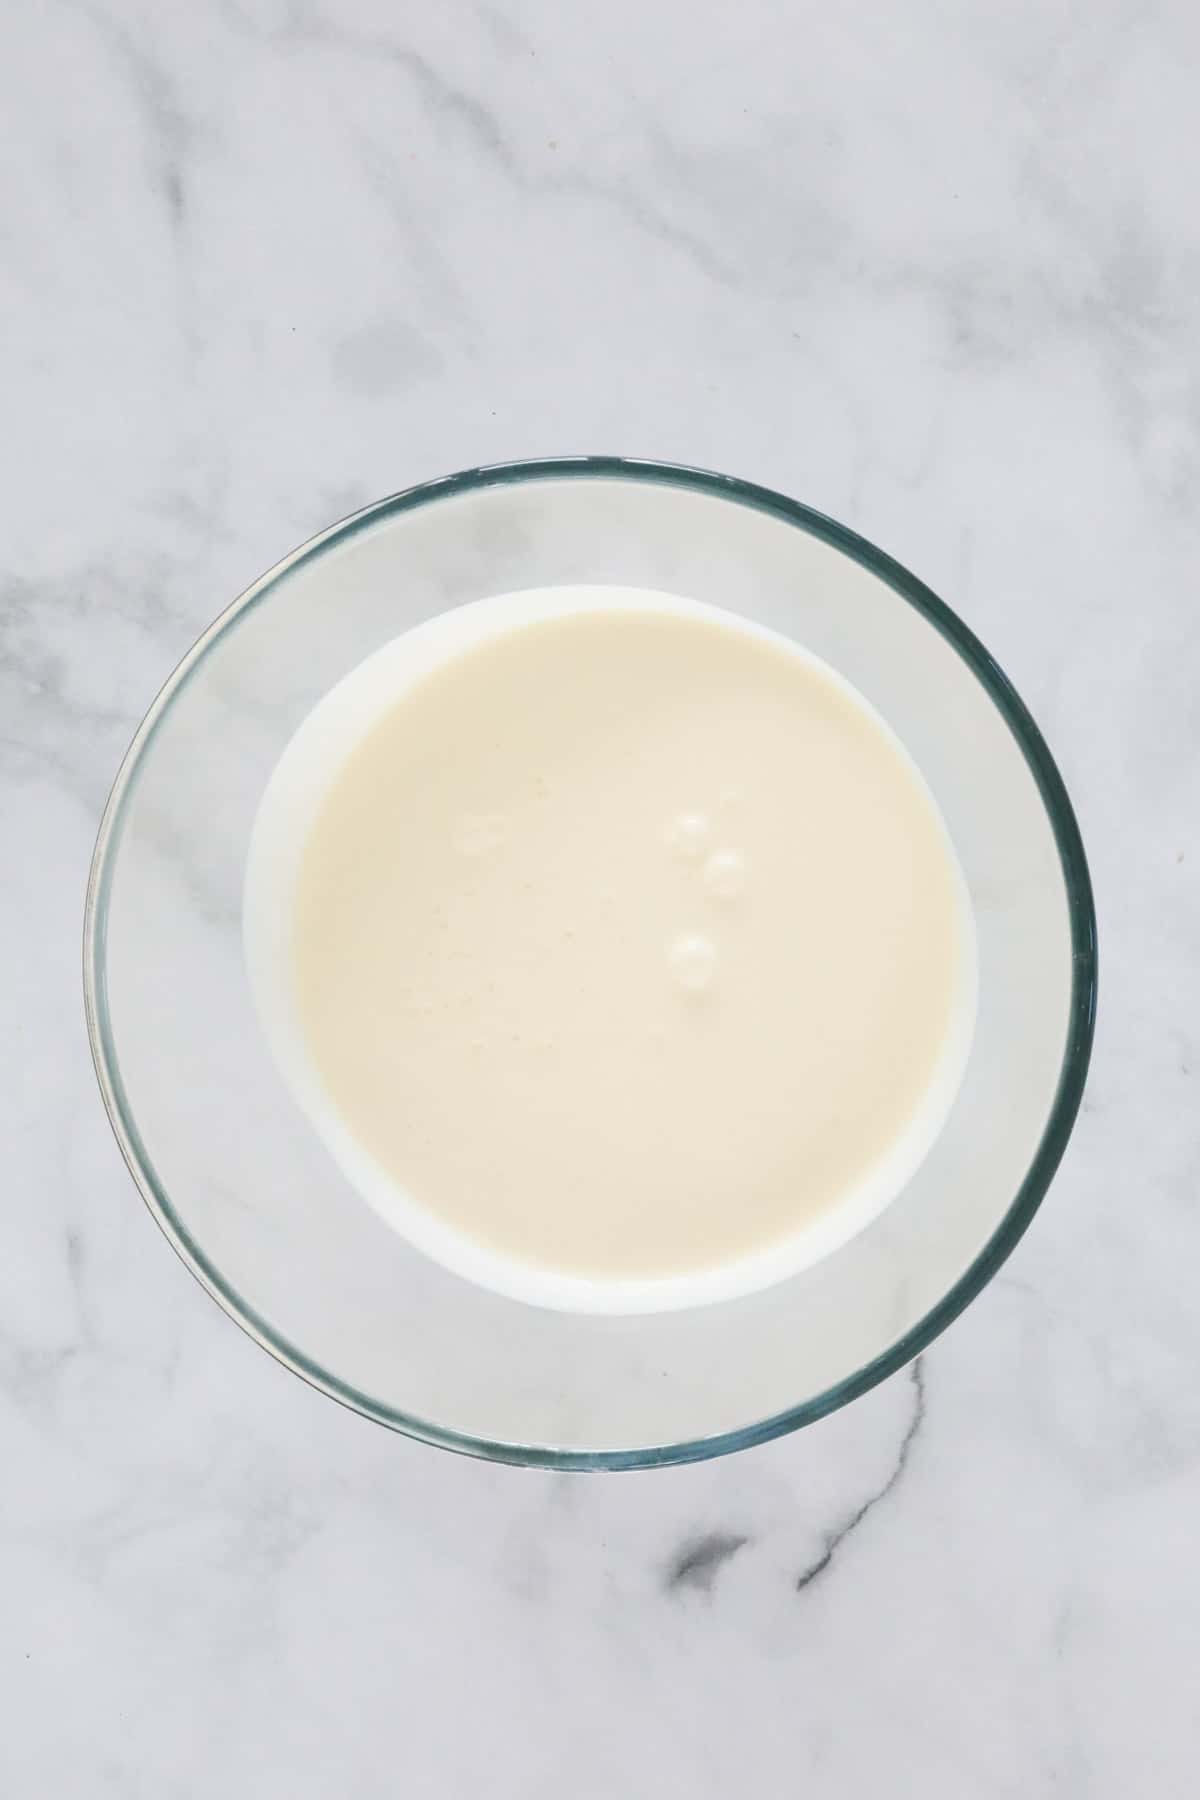 Thickened cream placed in a separate bowl.